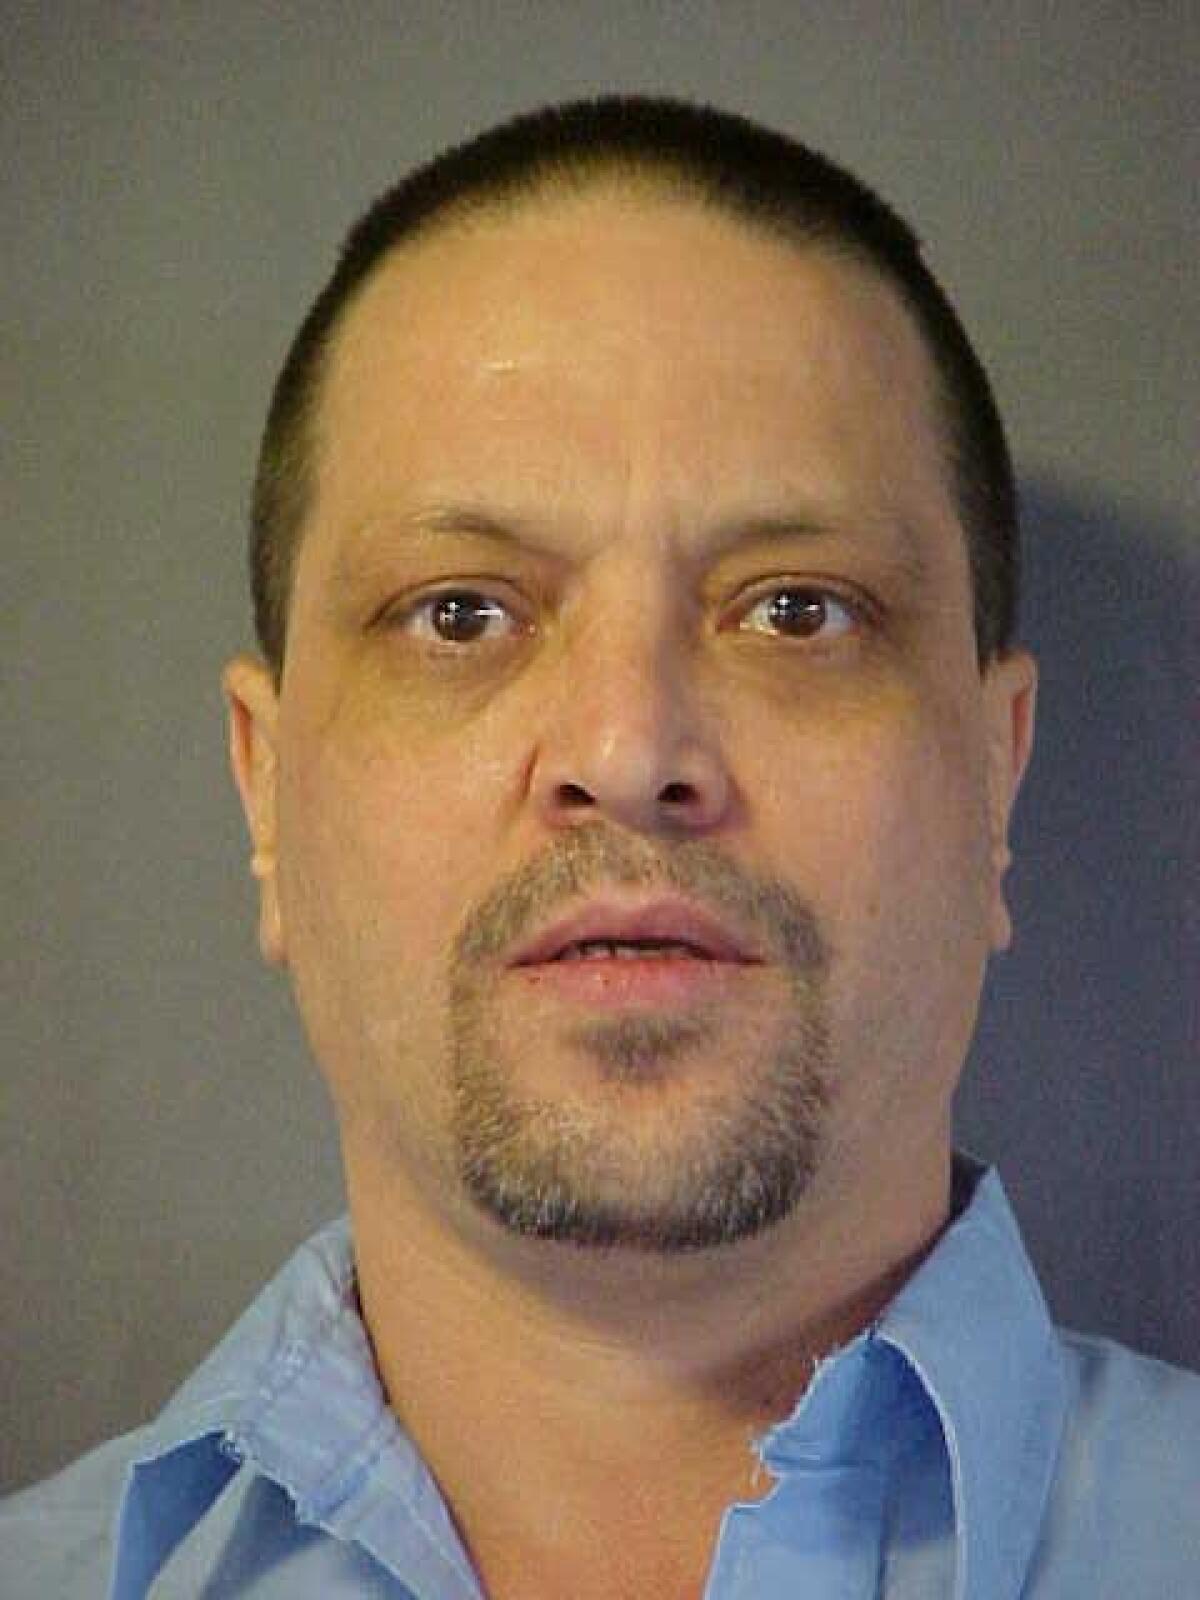 This undated photo provided by the Oklahoma Department of Corrections shows Richard Fairchild. The Oklahoma Pardon and Parole Board on Wednesday, Oct. 12, 2022 rejected a request to recommend clemency for death row inmate Richard Stephen Fairchild. The board turned down the request to recommend to Gov. Kevin Stitt that Fairchild be spared for the 1993 beating death of Adam Broomhall, his girlfriend’s 3-year-old son, in Del City. (Oklahoma Department of Corrections via AP)